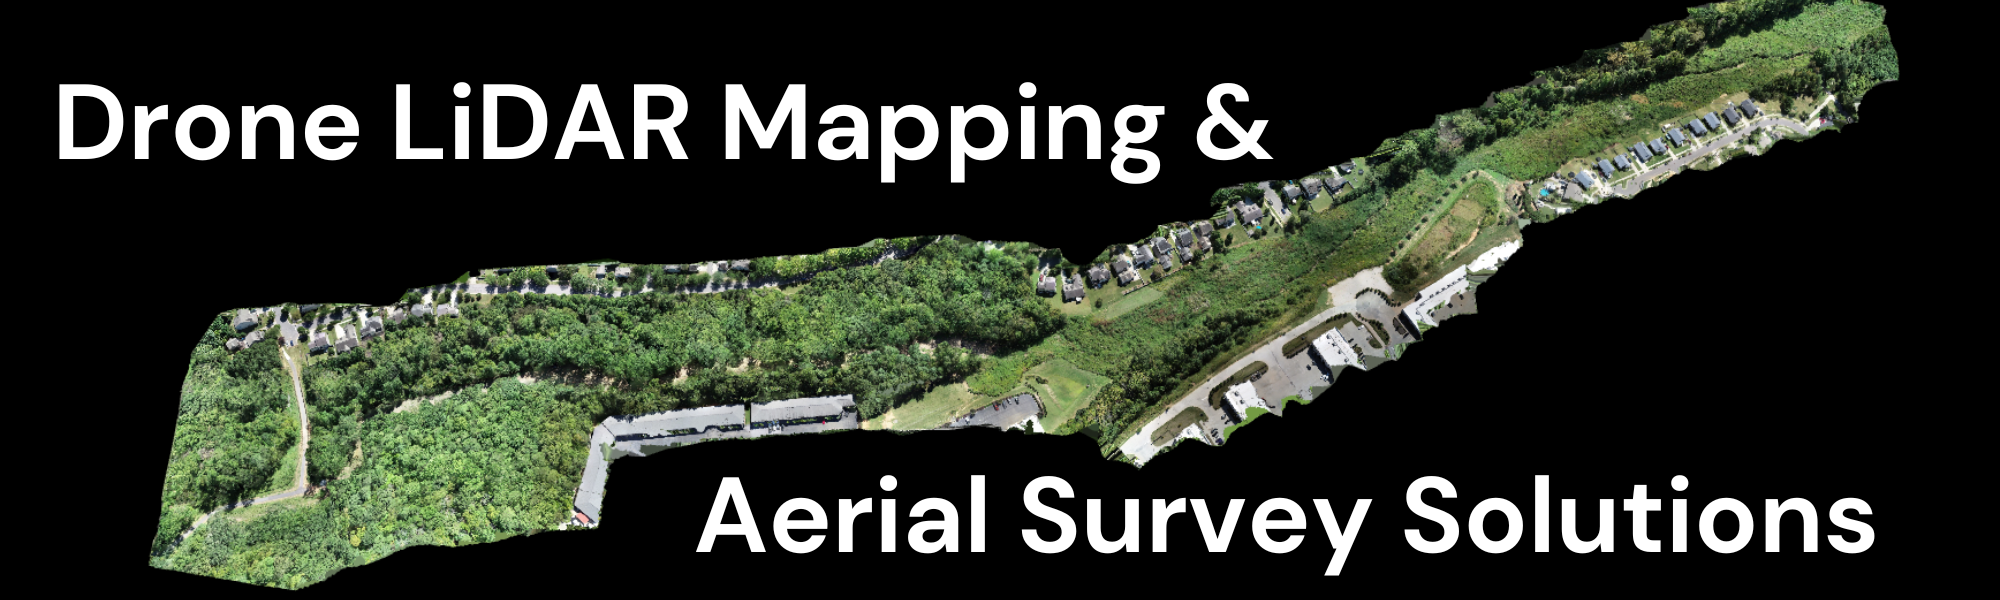 Drone LiDAR Mapping & survey solutions